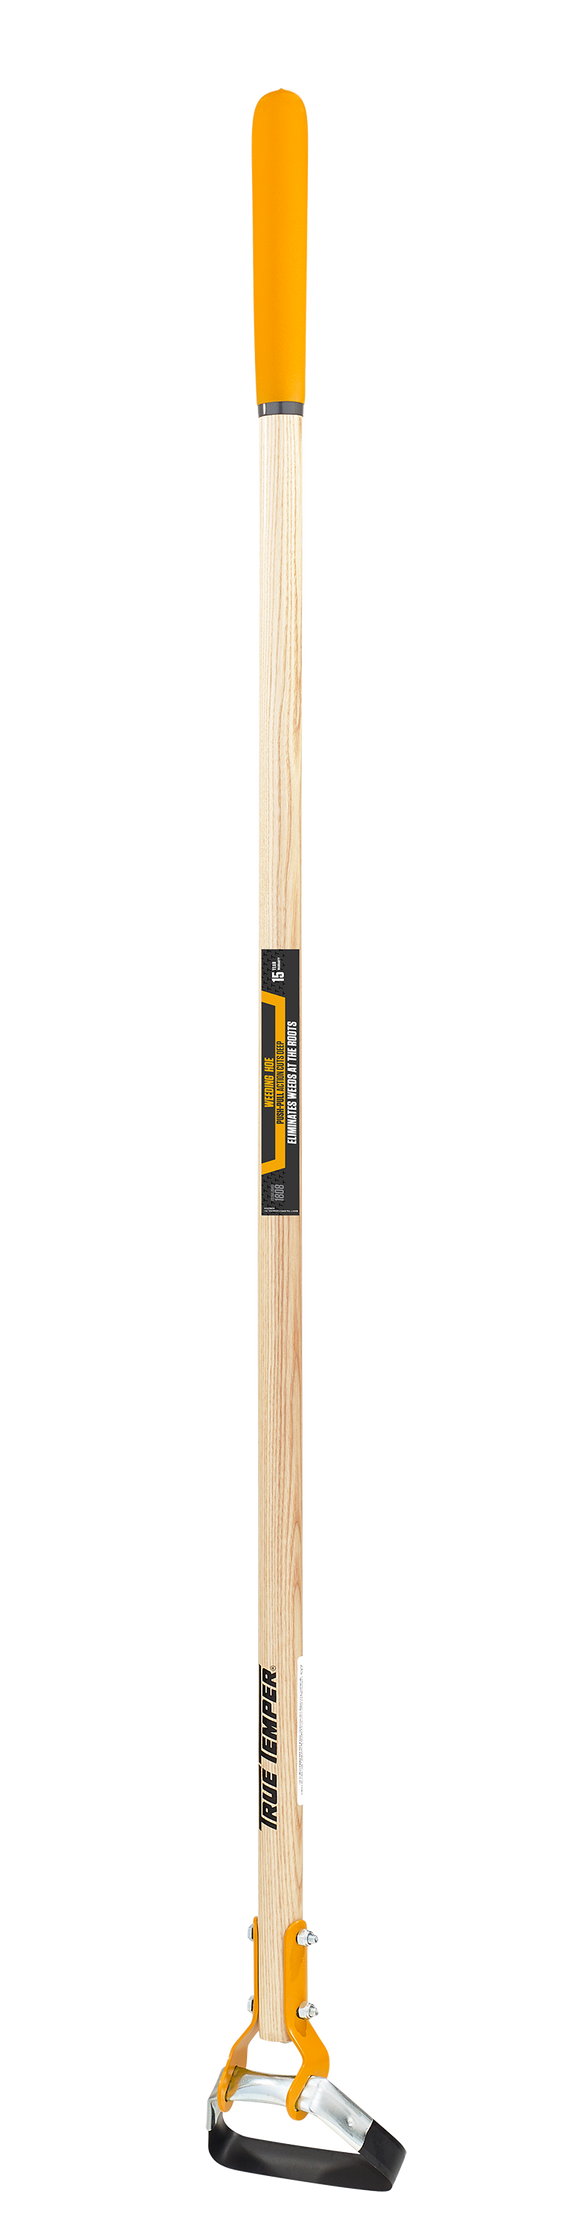 AMES TRUE TEMPER ACTION HOE WITH CUSHION END GRIP ON HARDWOOD HANDLE